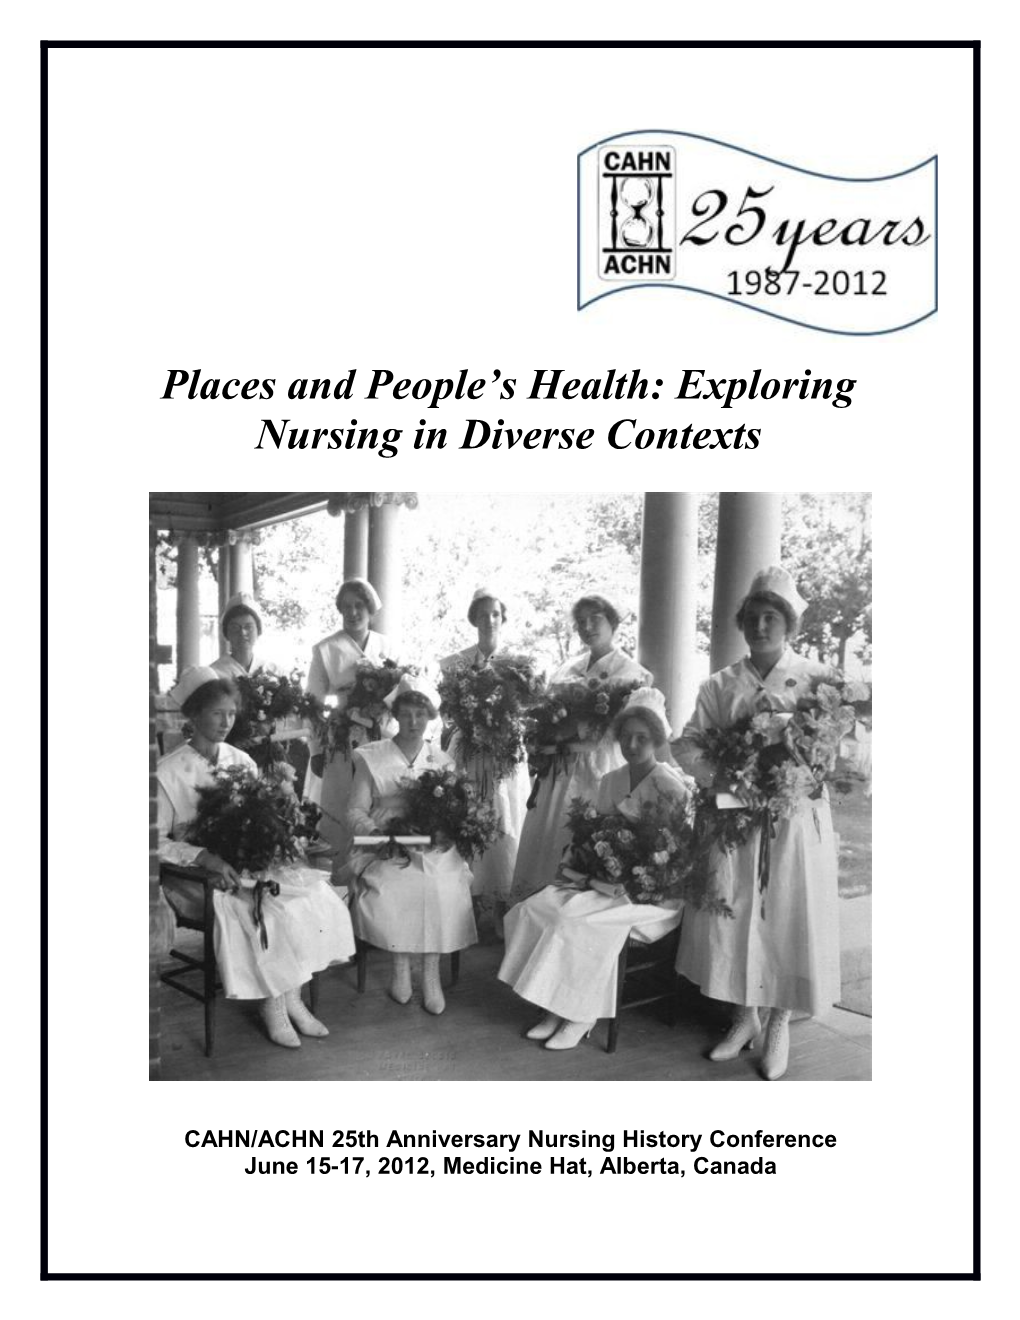 Places and People S Health: Exploring Nursing in Diverse Contexts